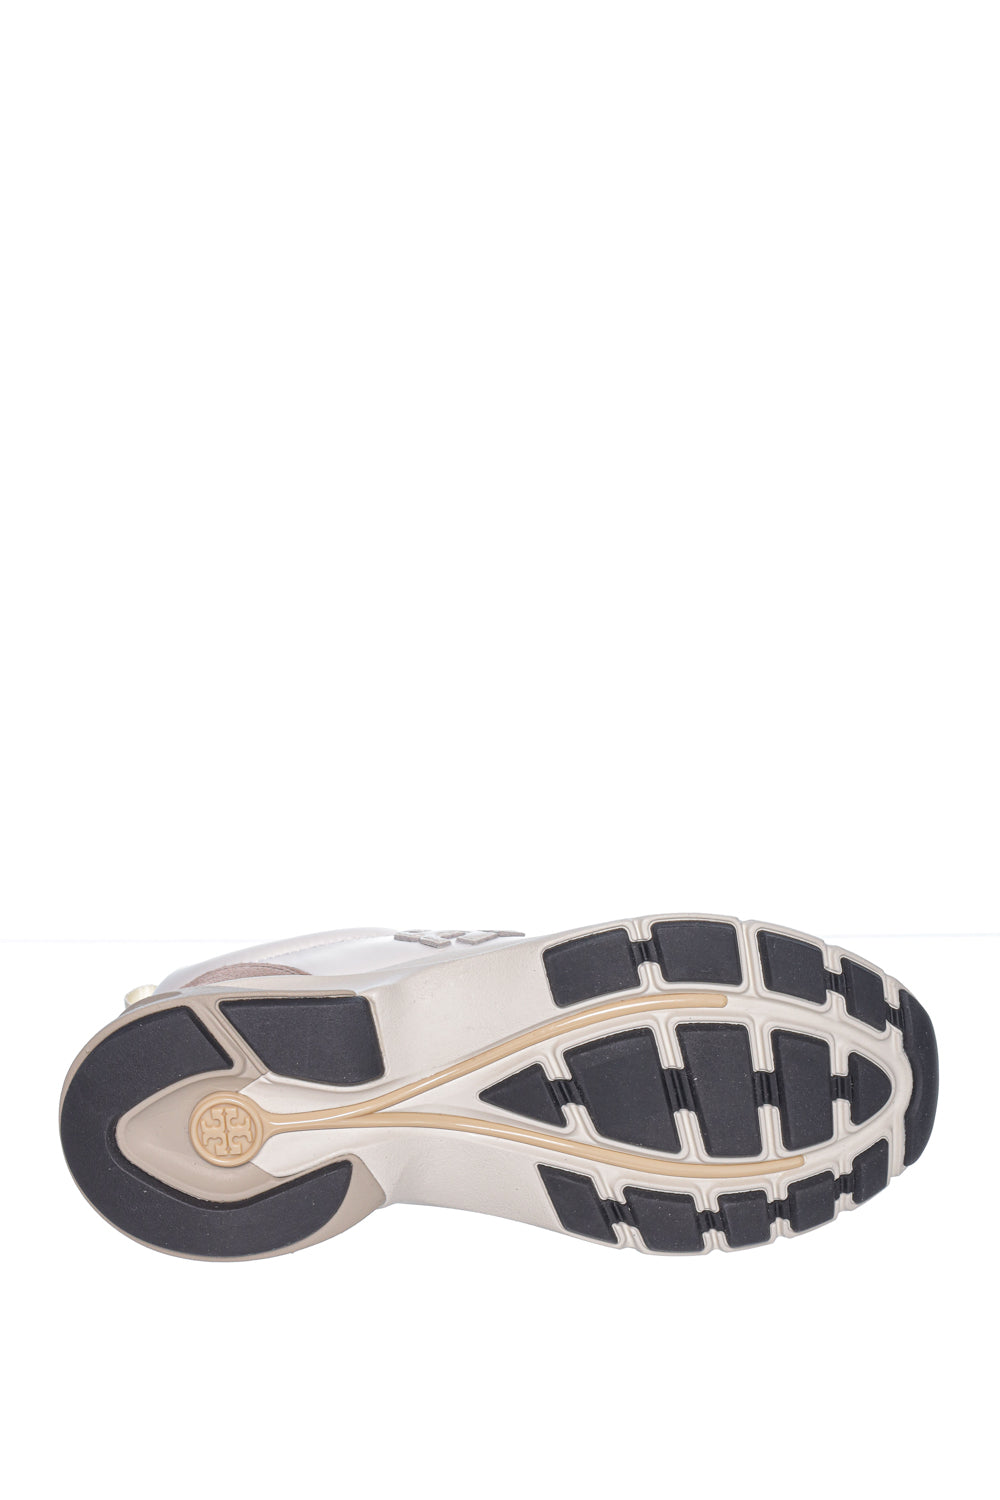 Sneakers Tory Burch Good Luck Trainer